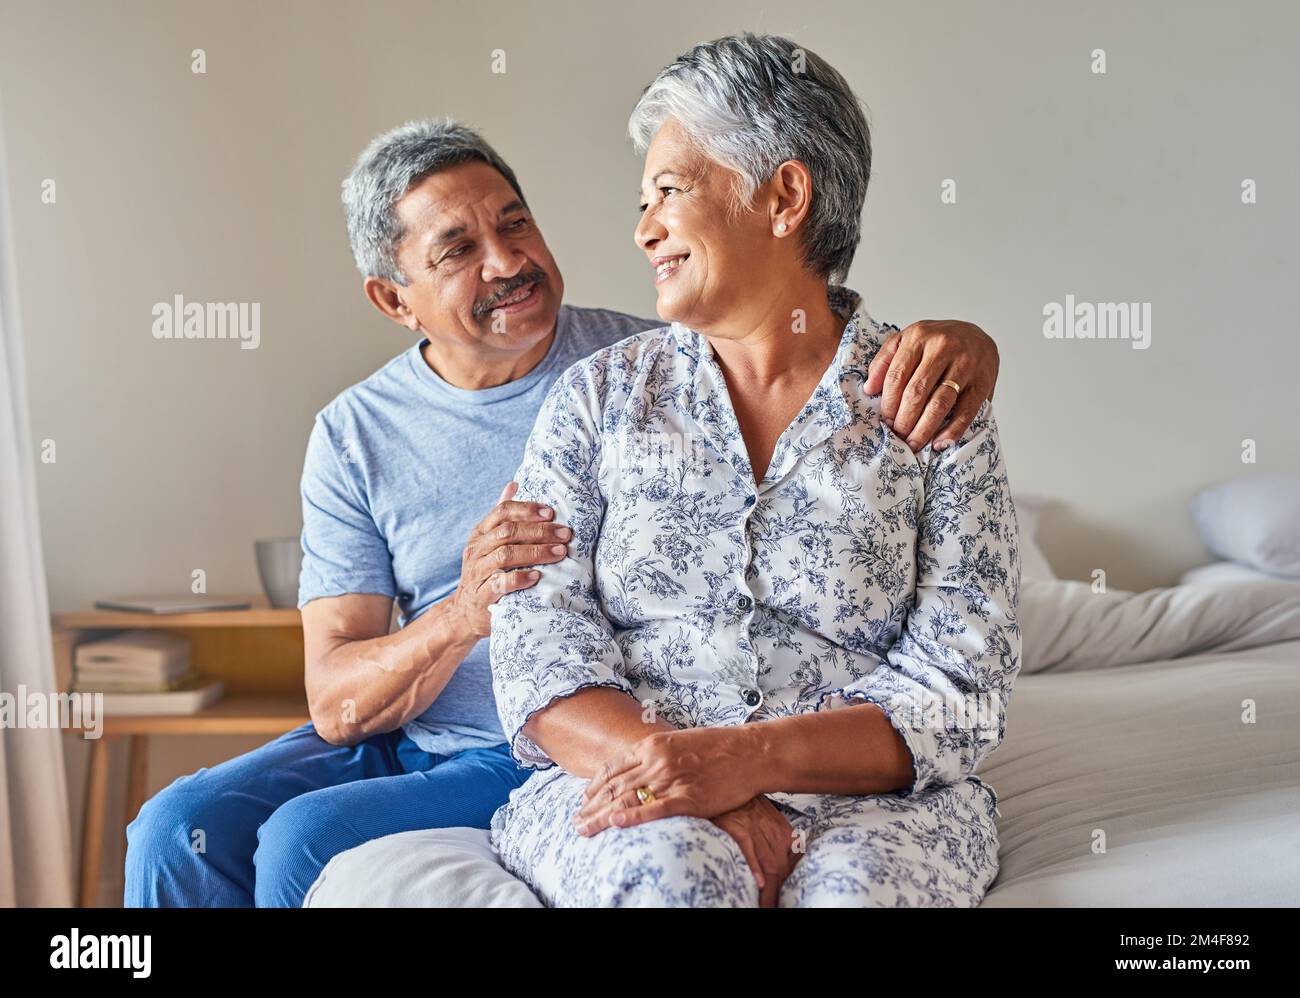 Our lives are the adventure weve been living for. Portrait of a cheerful mature couple holding each other while being seated on a bed at home during Stock Photo